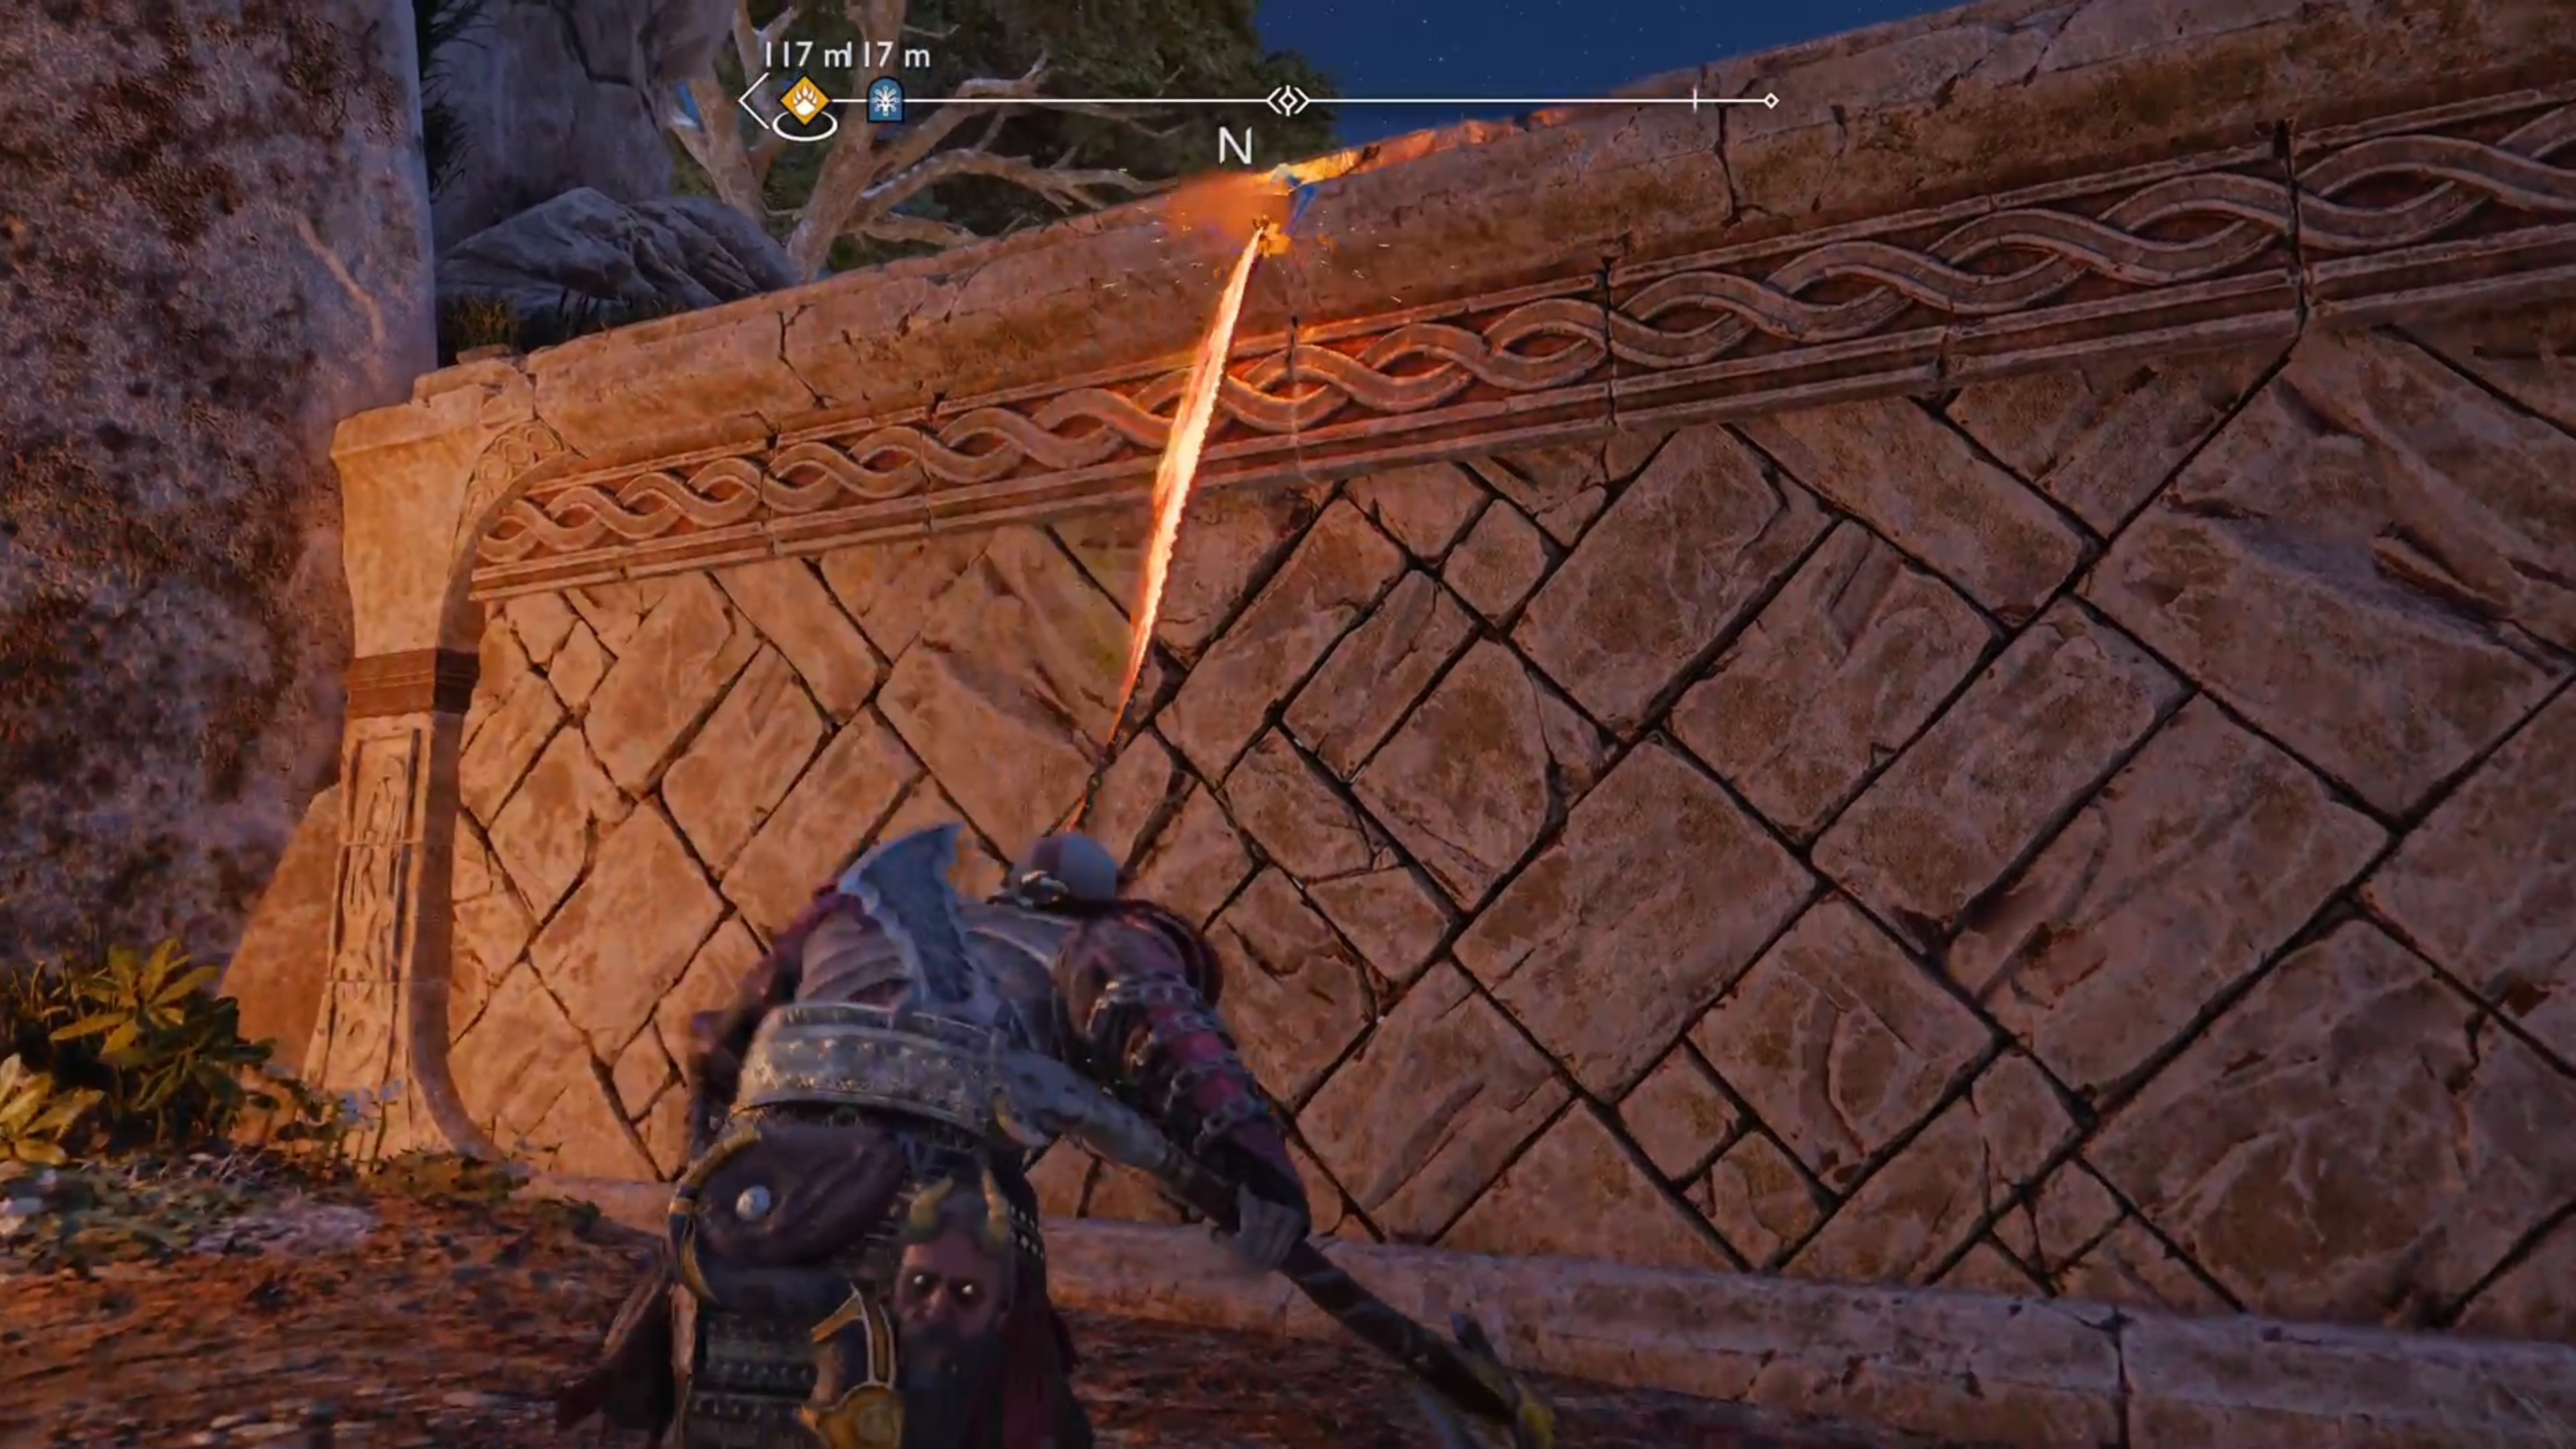 Grapple up to this ledge after passing through the archway